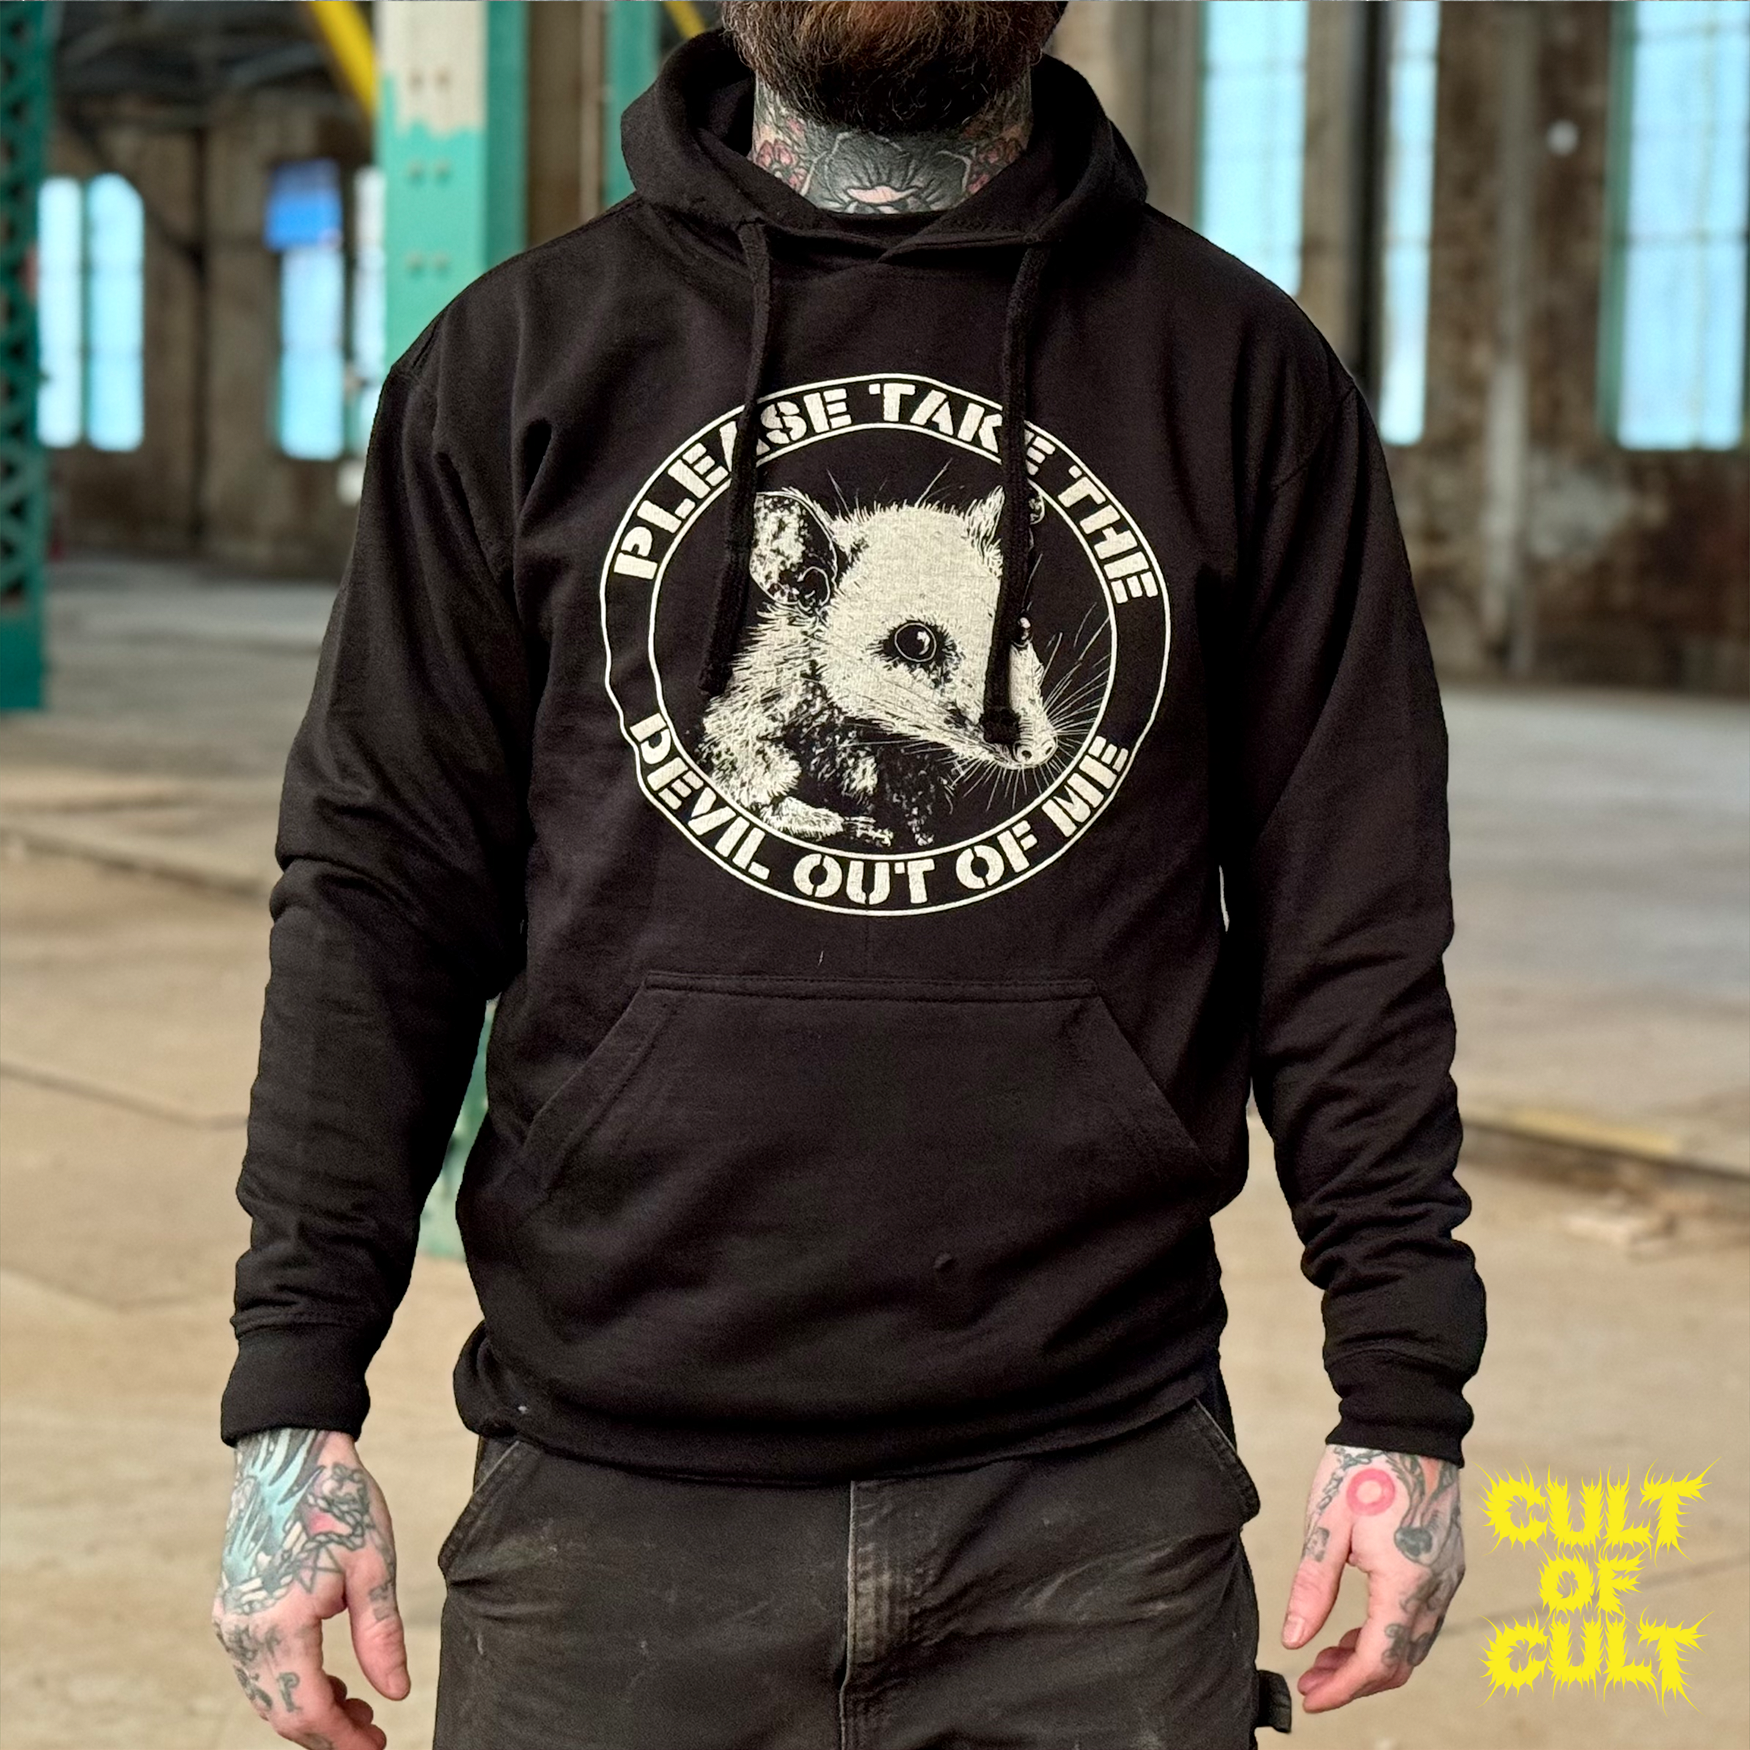 A model wearing the George Jones hoodie, pictured from the front